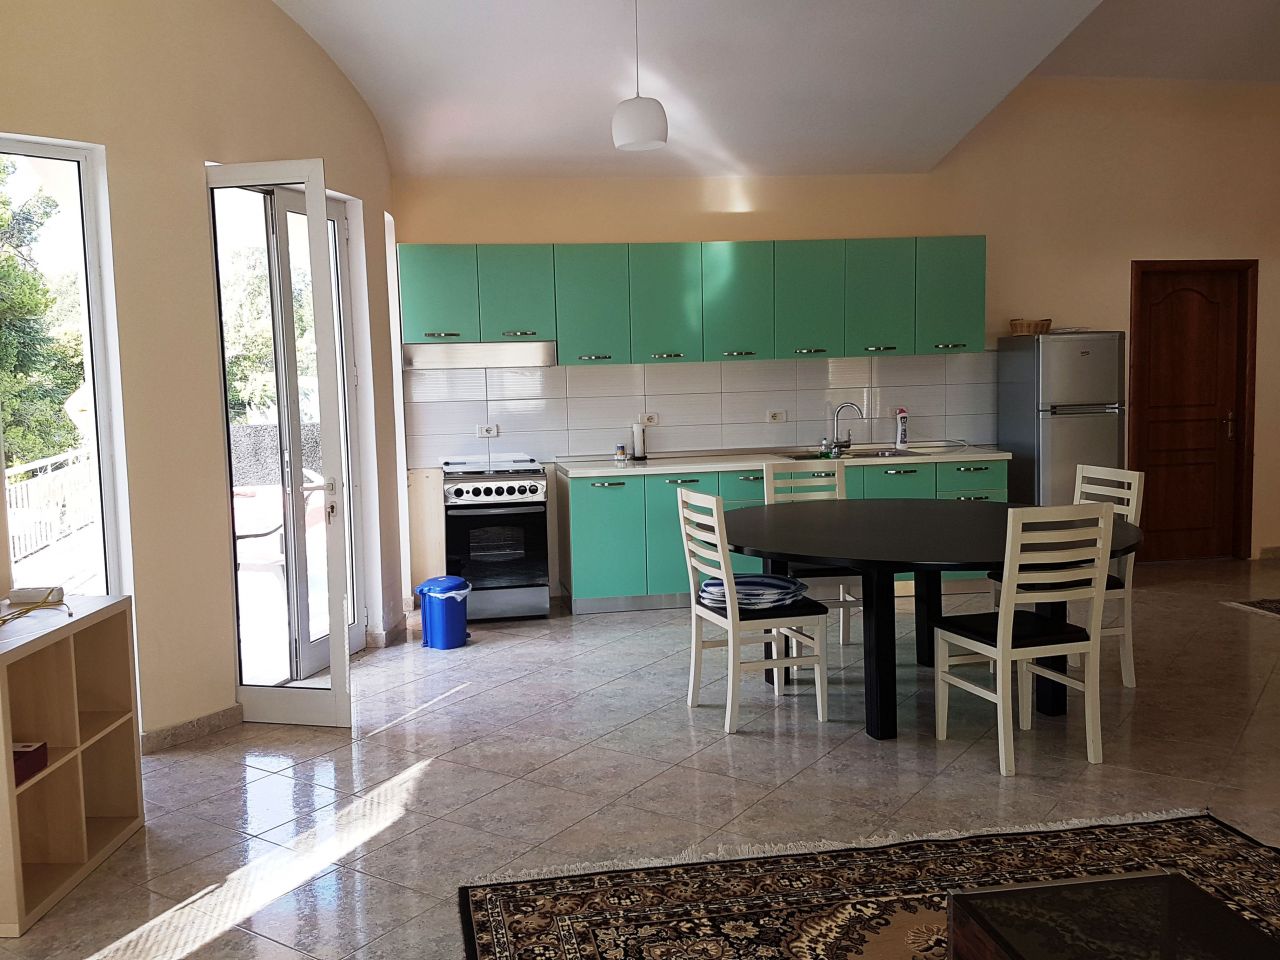 Two bedroom apartment for rent in Tirana within 10 minutes drive from Tirana center.